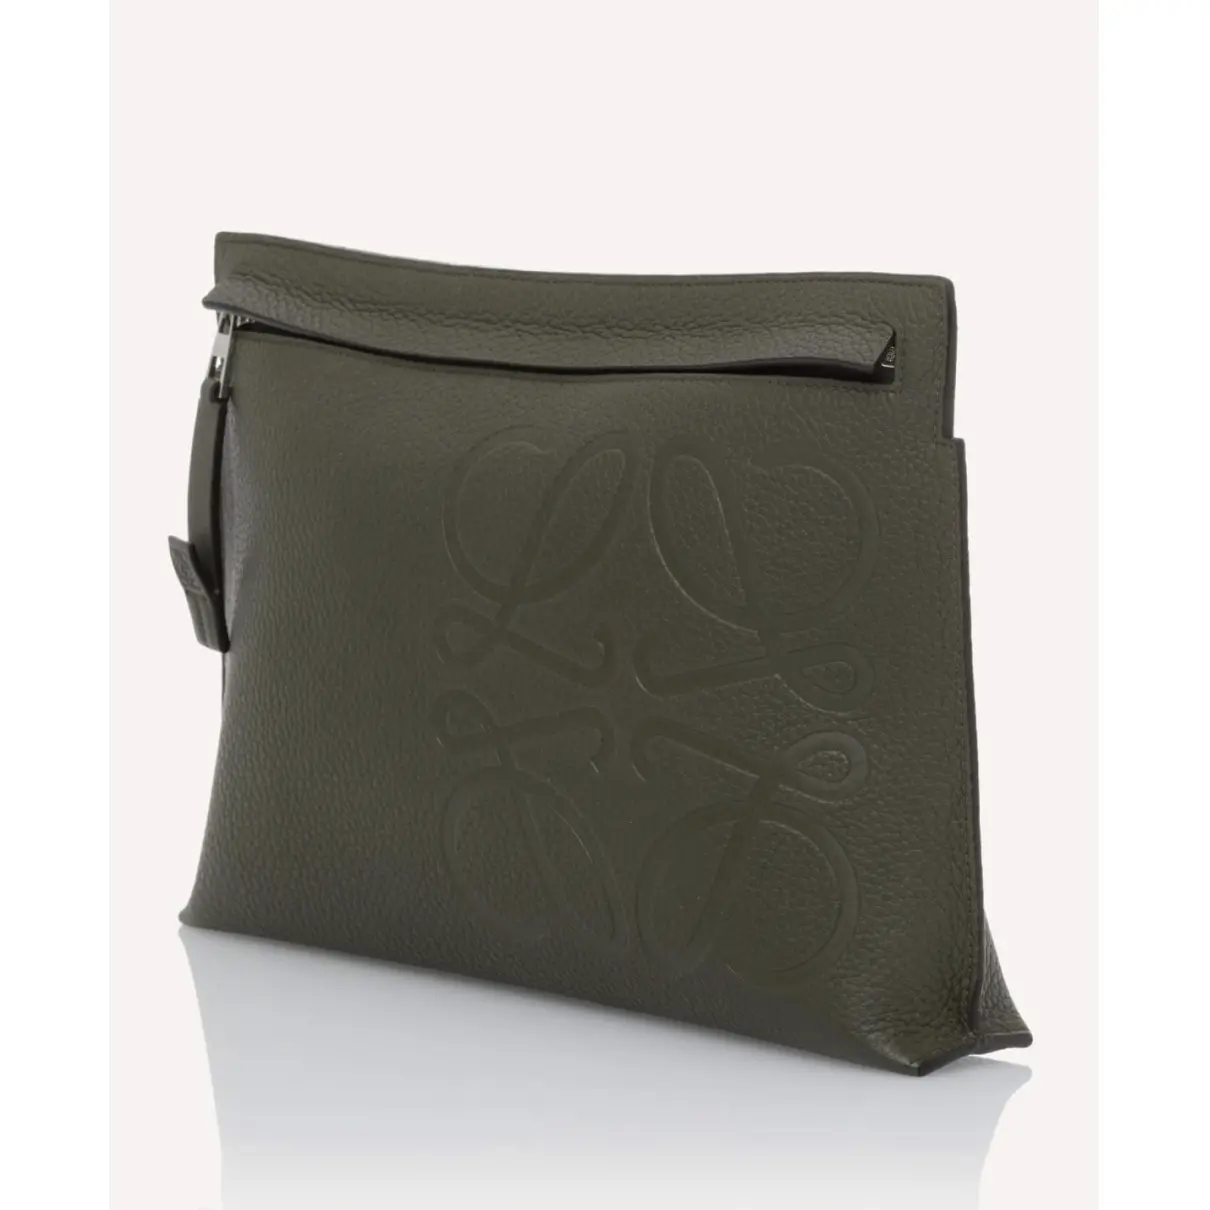 Buy Loewe T Pouch leather clutch bag online